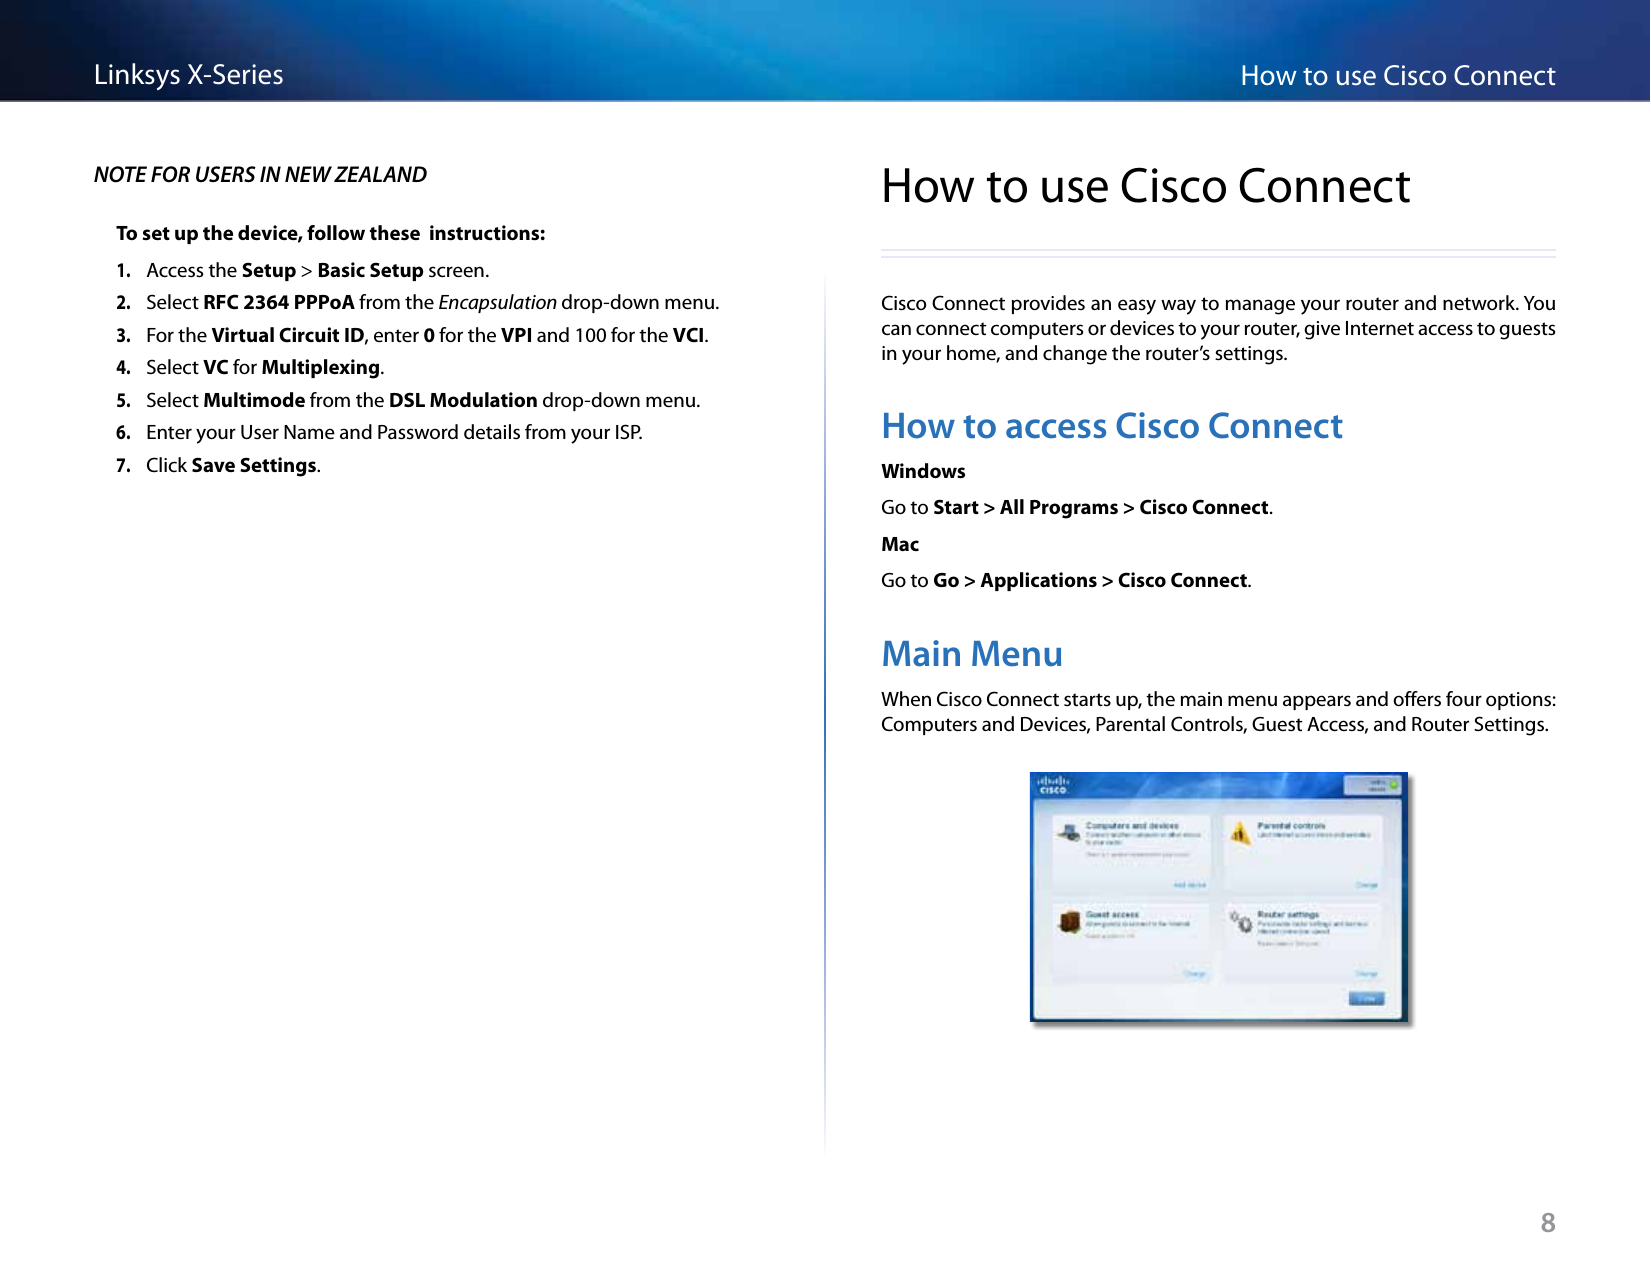 8How to use Cisco ConnectLinksys X-SeriesNOTE FOR USERS IN NEW ZEALANDTo set up the device, follow these  instructions:1. Access the Setup &gt; Basic Setup screen.2. Select RFC 2364 PPPoA from the Encapsulation drop-down menu.3. For the Virtual Circuit ID, enter 0 for the VPI and 100 for the VCI.4. Select VC for Multiplexing.5. Select Multimode from the DSL Modulation drop-down menu.6. Enter your User Name and Password details from your ISP.7. Click Save Settings.How to use Cisco ConnectCisco Connect provides an easy way to manage your router and network. You can connect computers or devices to your router, give Internet access to guests in your home, and change the router’s settings.How to access Cisco ConnectWindowsGo to Start &gt; All Programs &gt; Cisco Connect.MacGo to Go &gt; Applications &gt; Cisco Connect.Main MenuWhen Cisco Connect starts up, the main menu appears and offers four options: Computers and Devices, Parental Controls, Guest Access, and Router Settings.